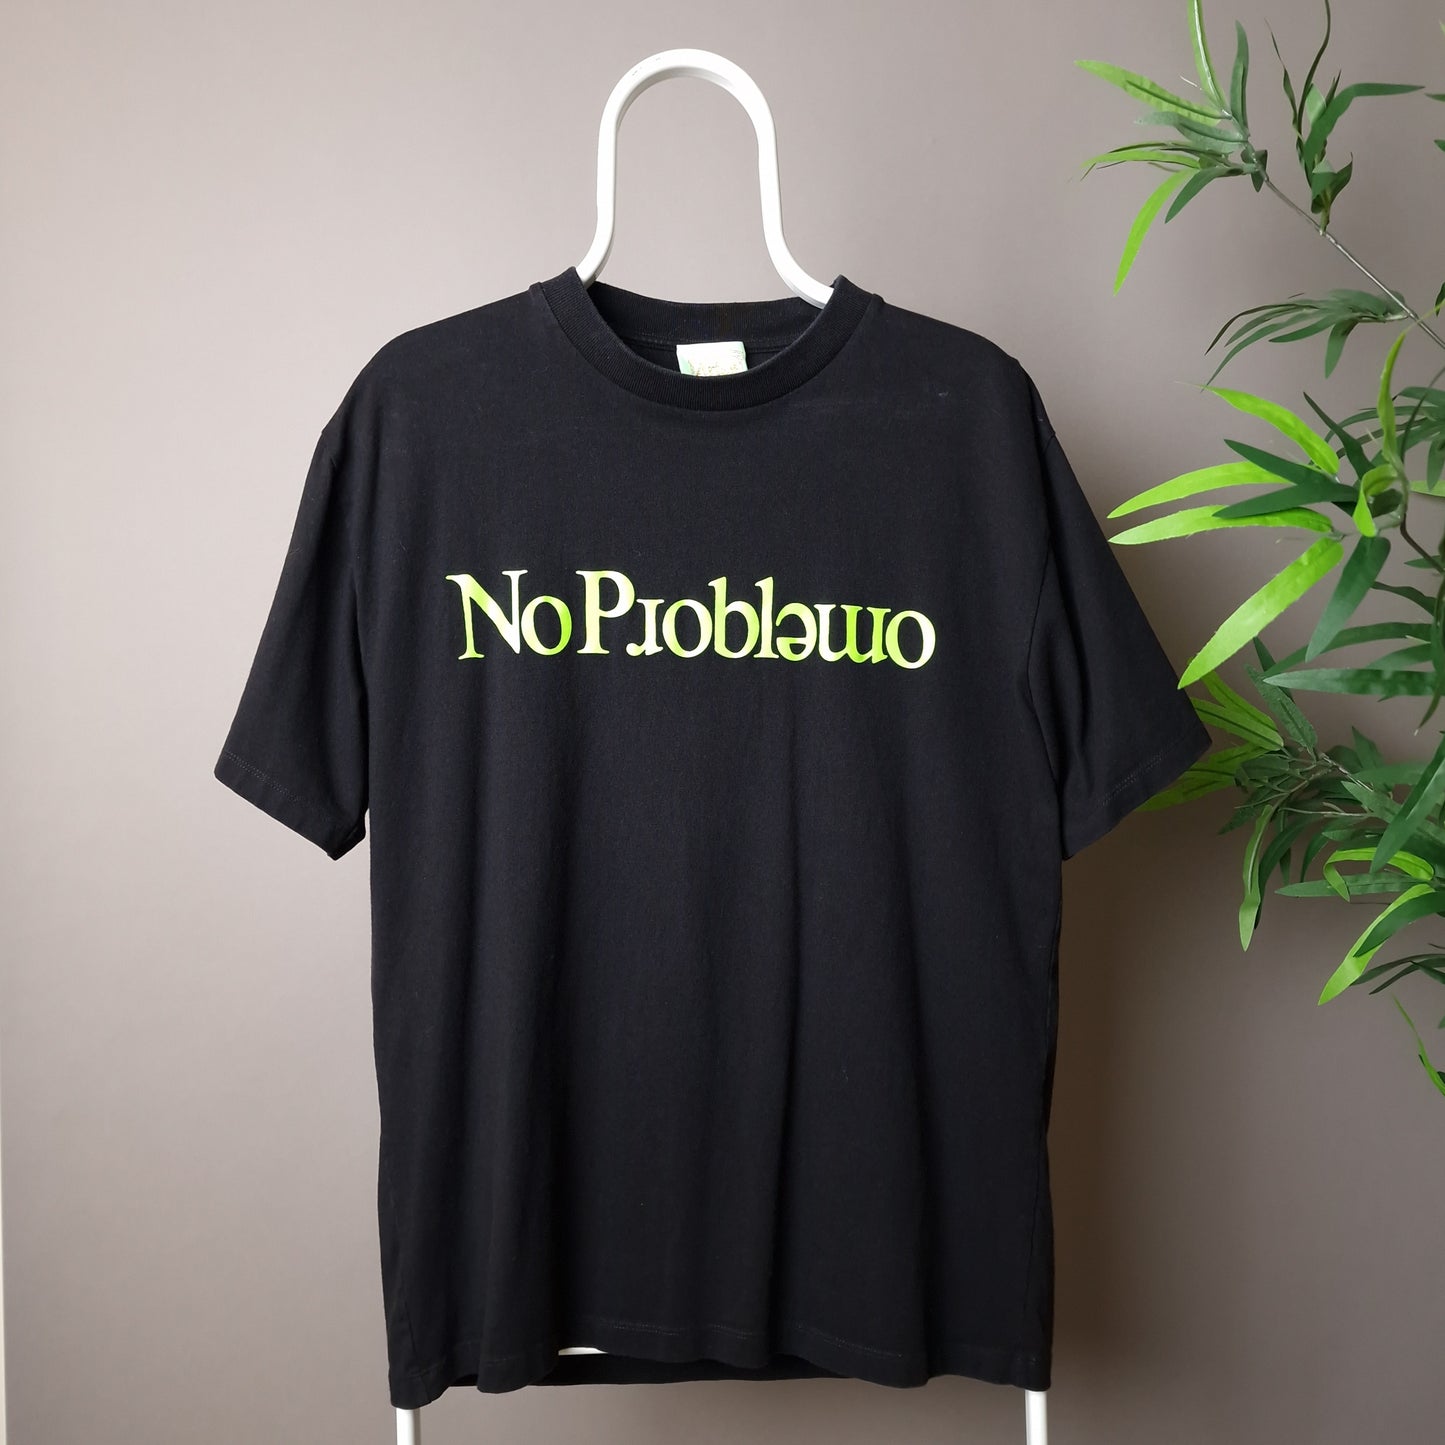 Aries No Problemo t-shirt in black and lime green - medium